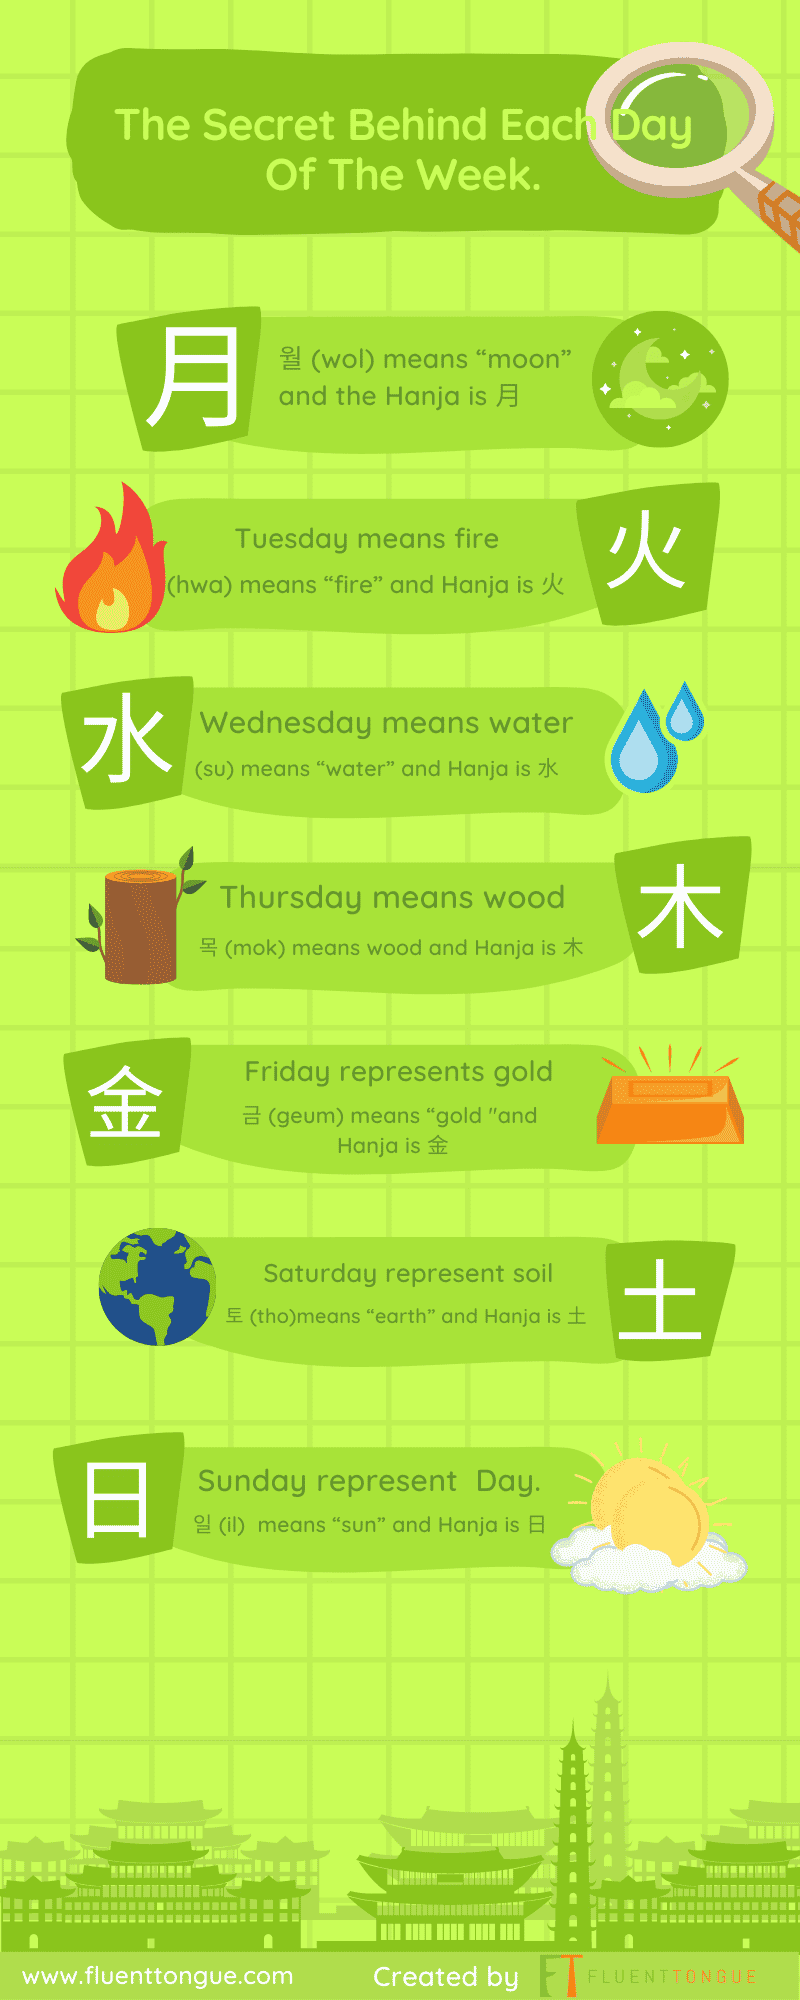 Korean Days Of The Week Meaning: The Secret Behind Each Day Of The Week.